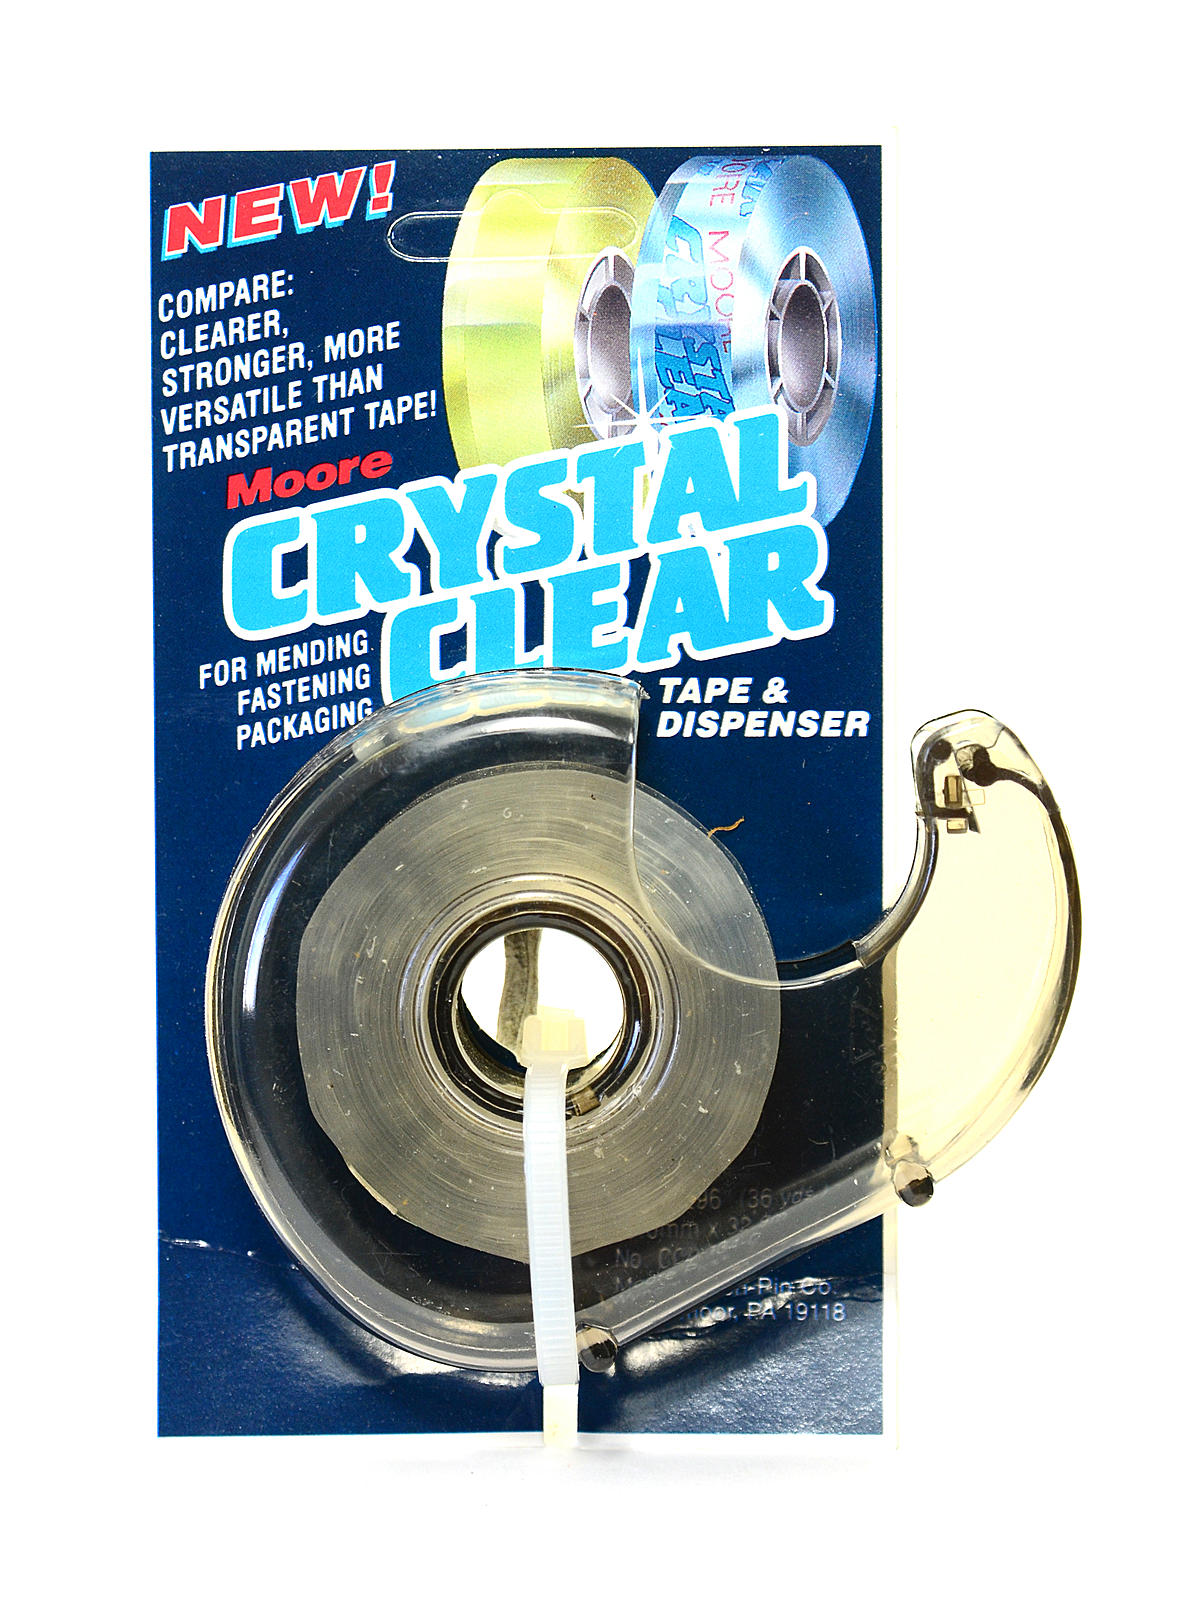 Crystal Clear Tape 3 4 In. X 1296 In. Roll Dispenser